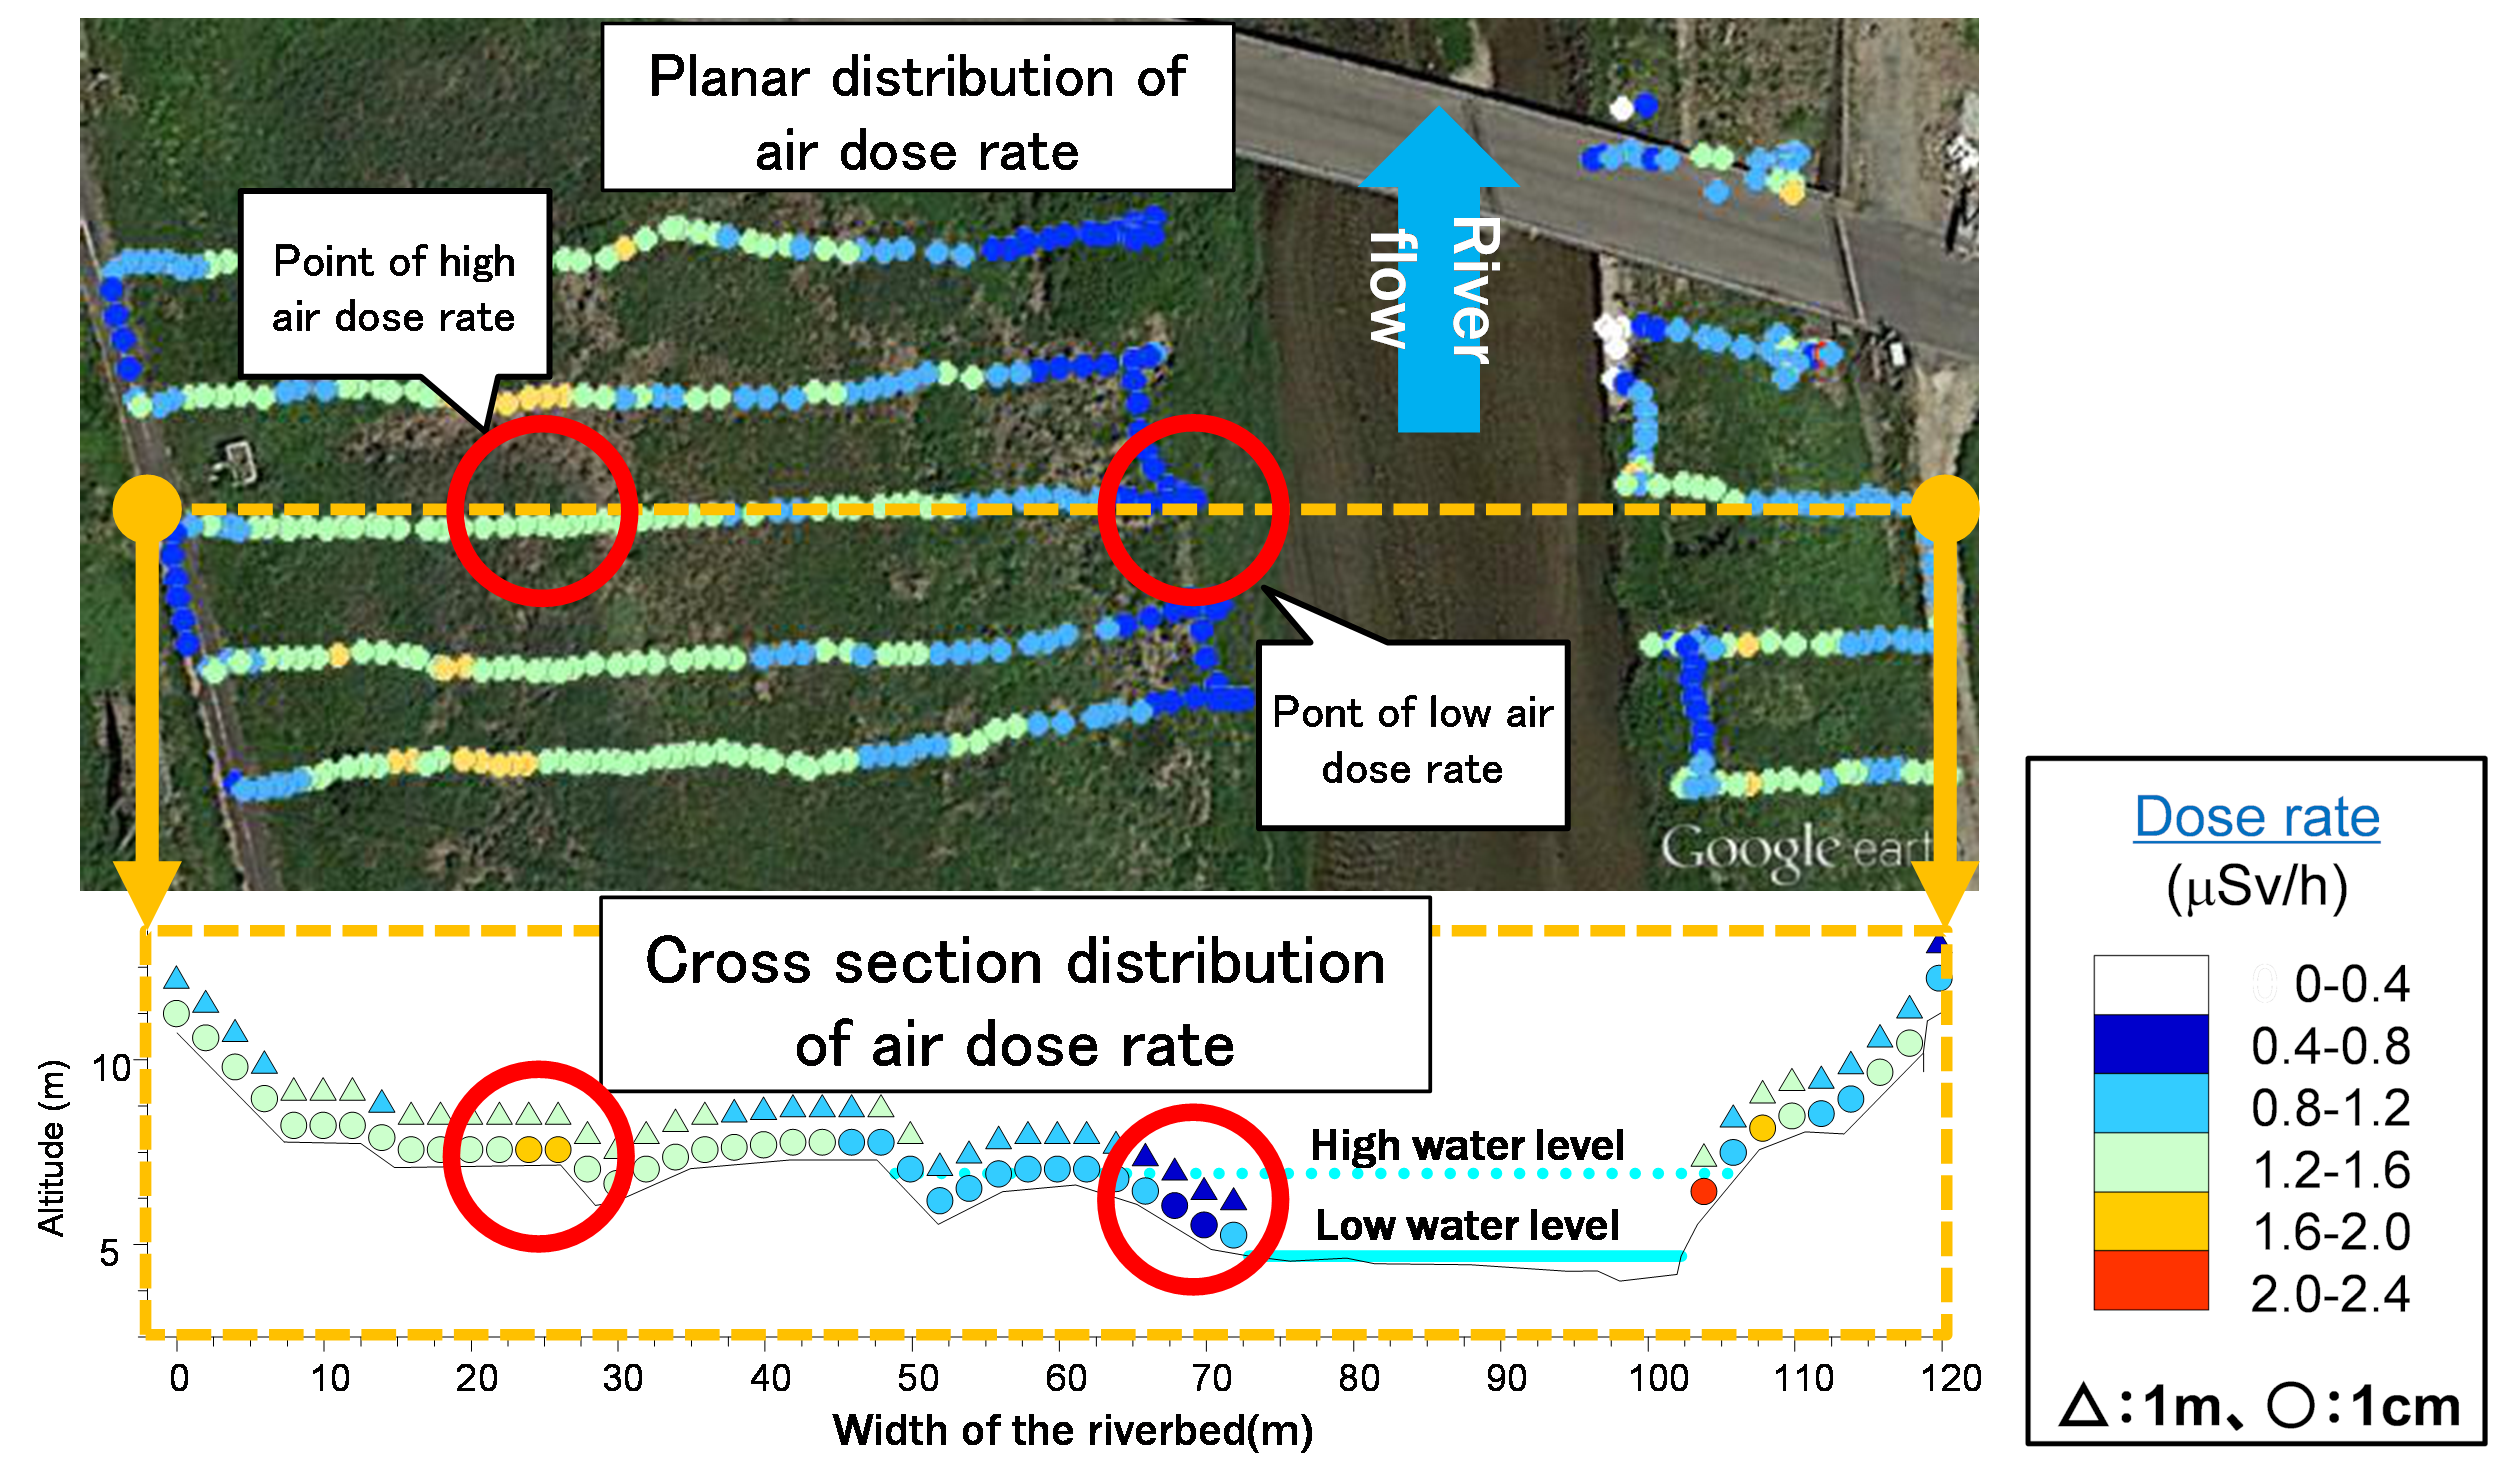 Air dose rate (1m height) and surface dose rate(1cm height) are measured to investigate the distribution of 137Cs in the riverbed.